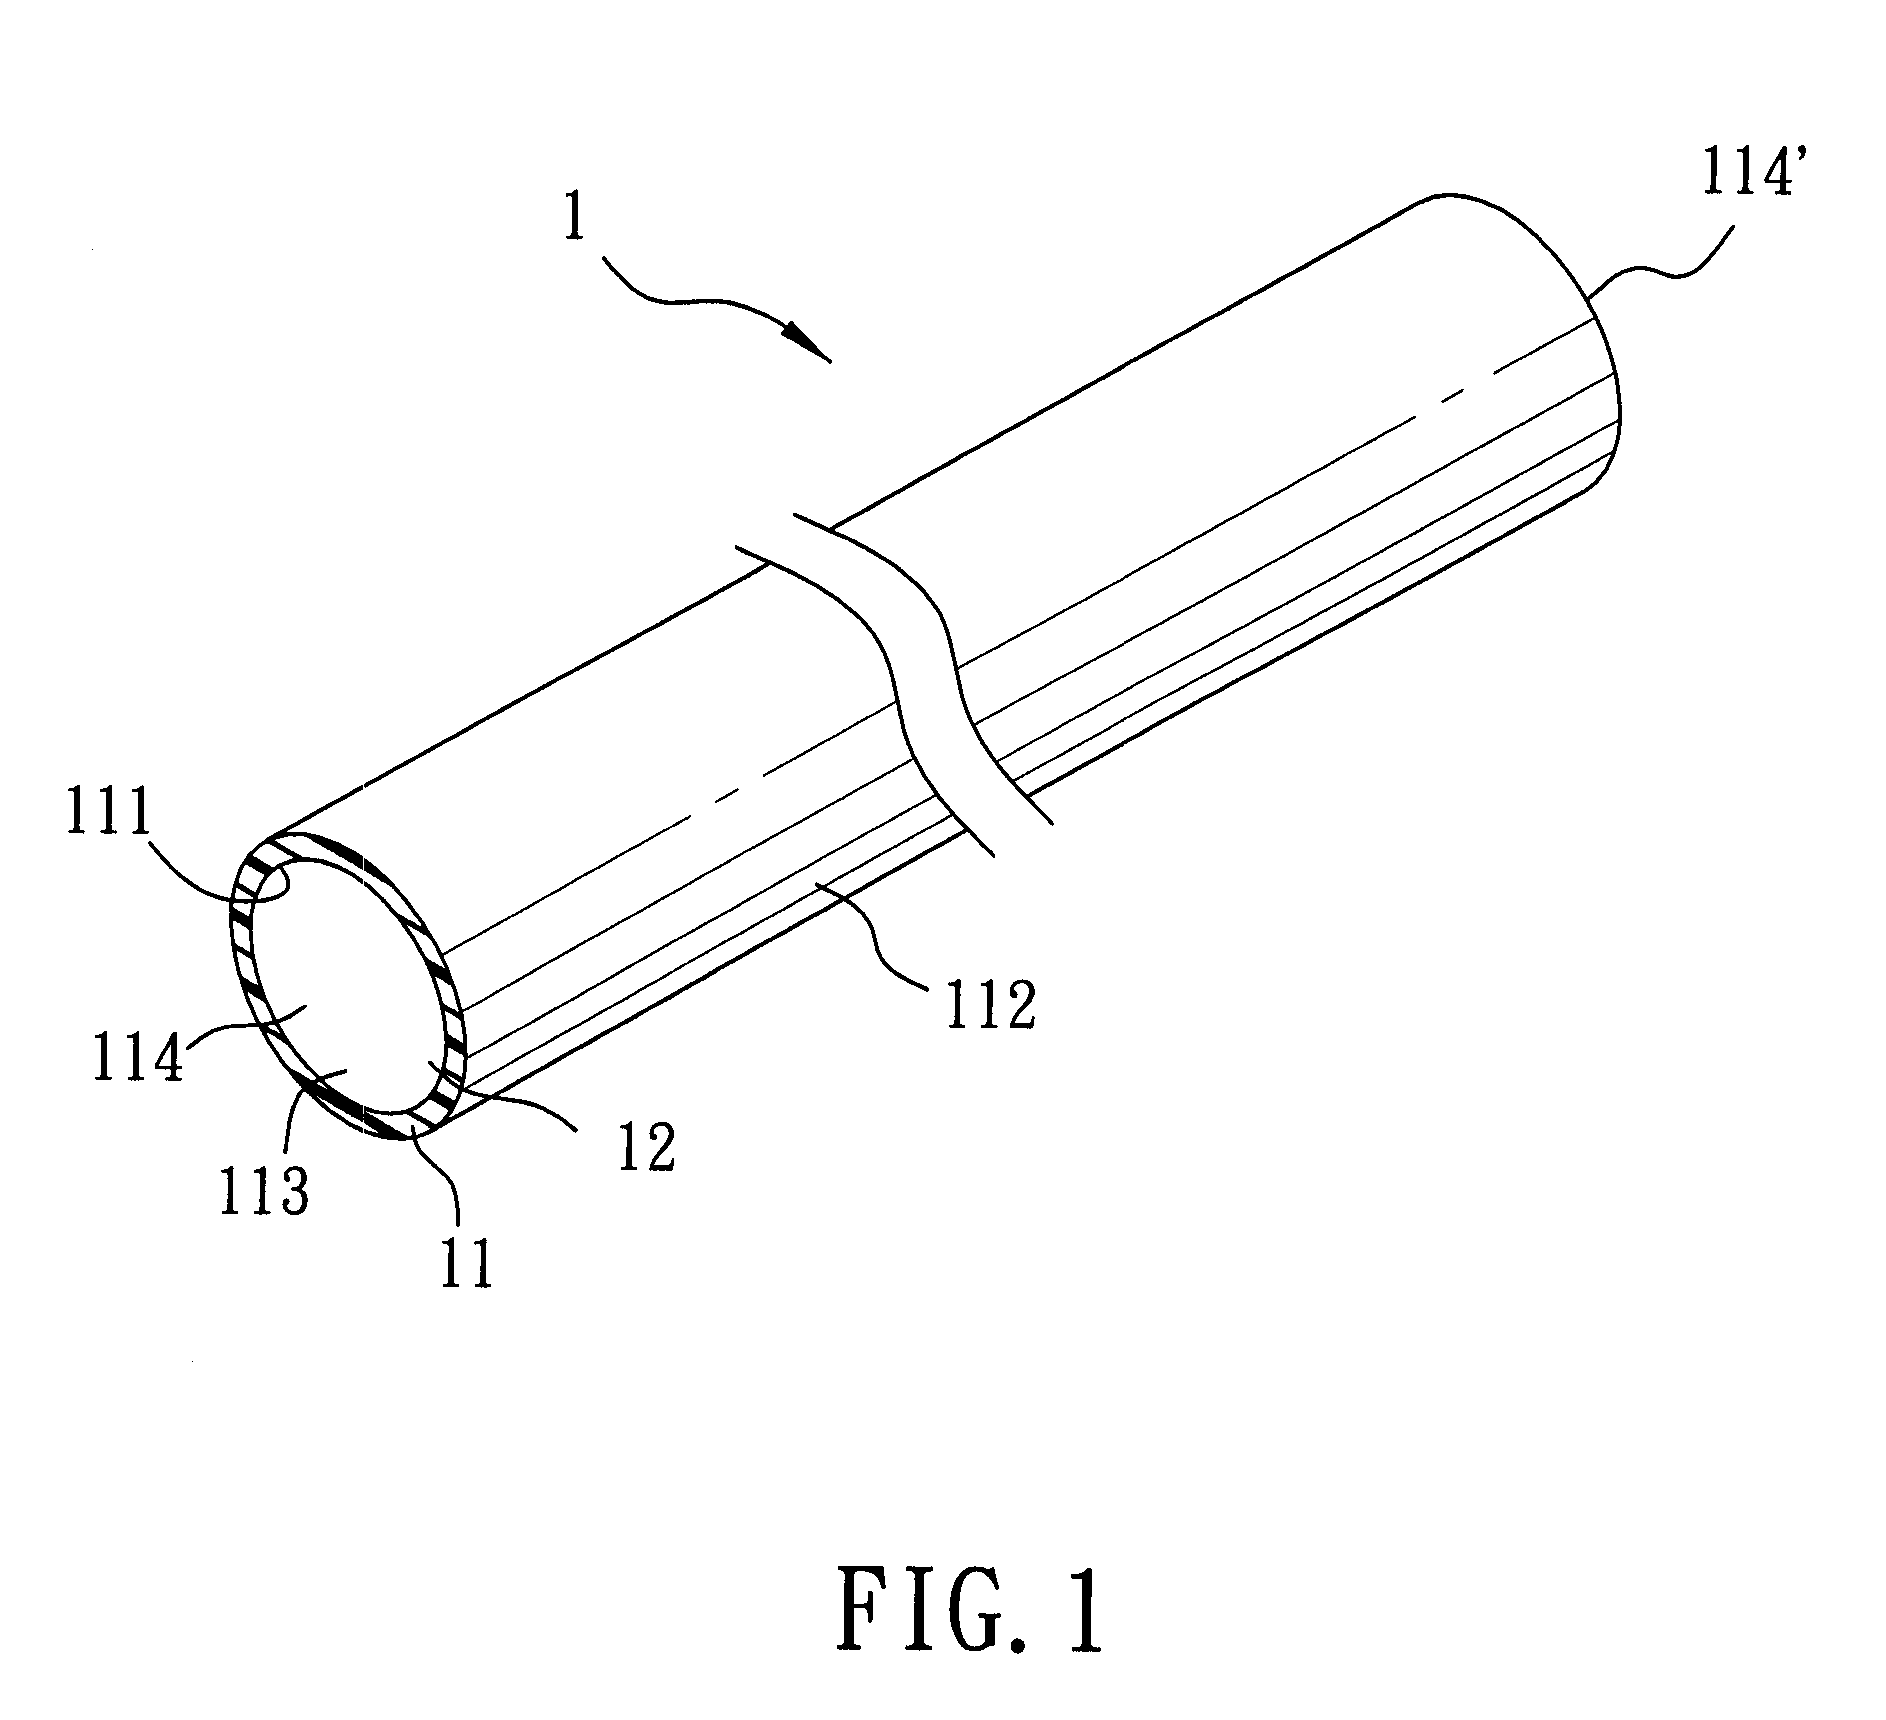 Waveguide having a cladded core for guiding terahertz waves